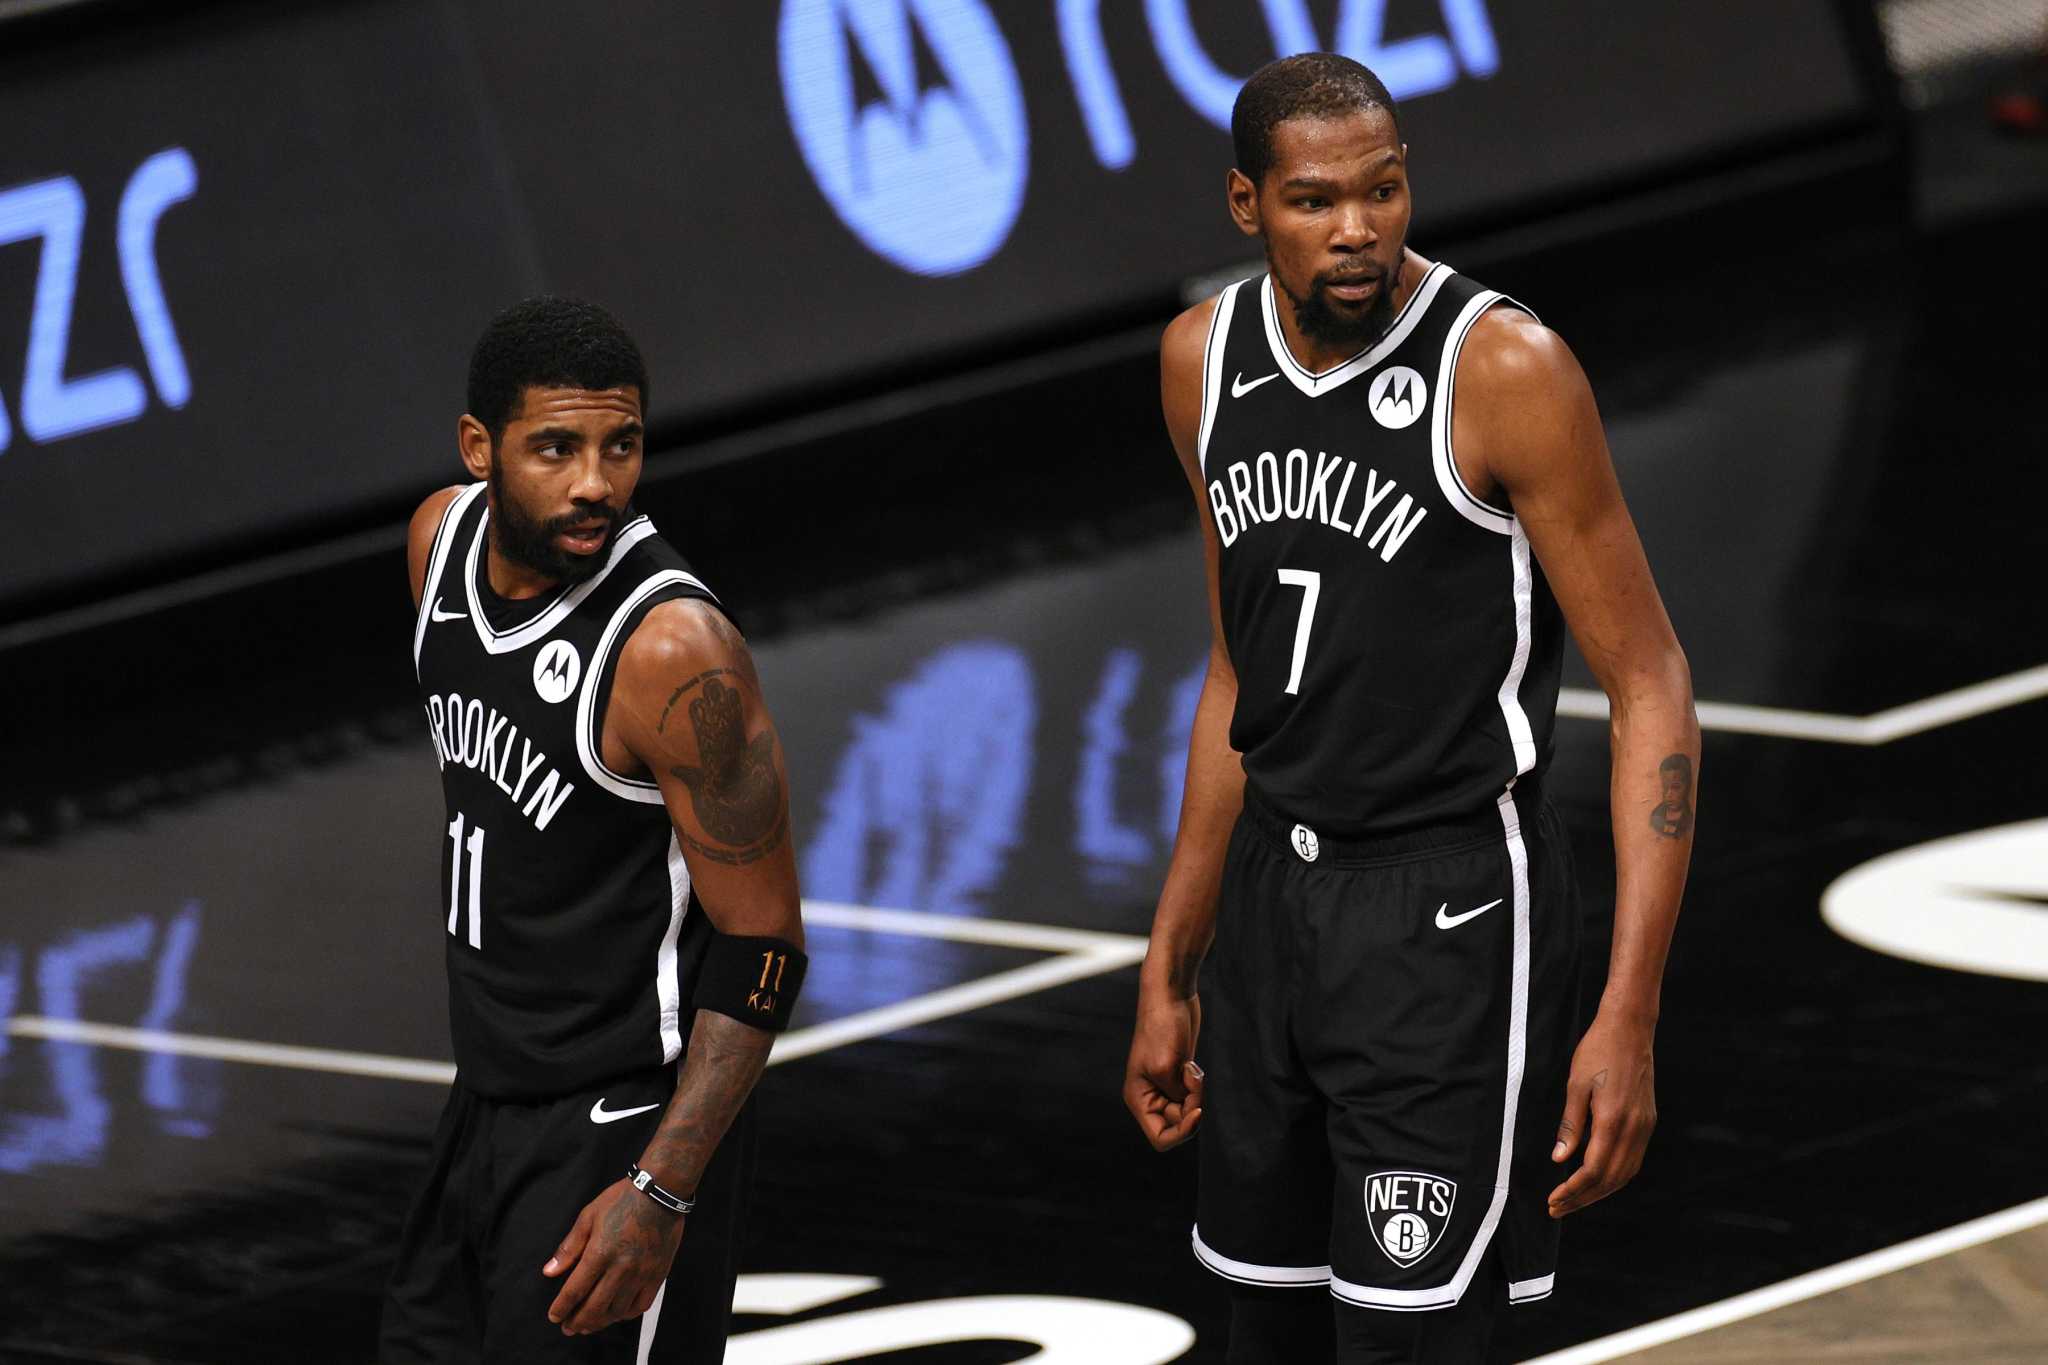 Sean Marks: Time for Nets to move on from James Harden